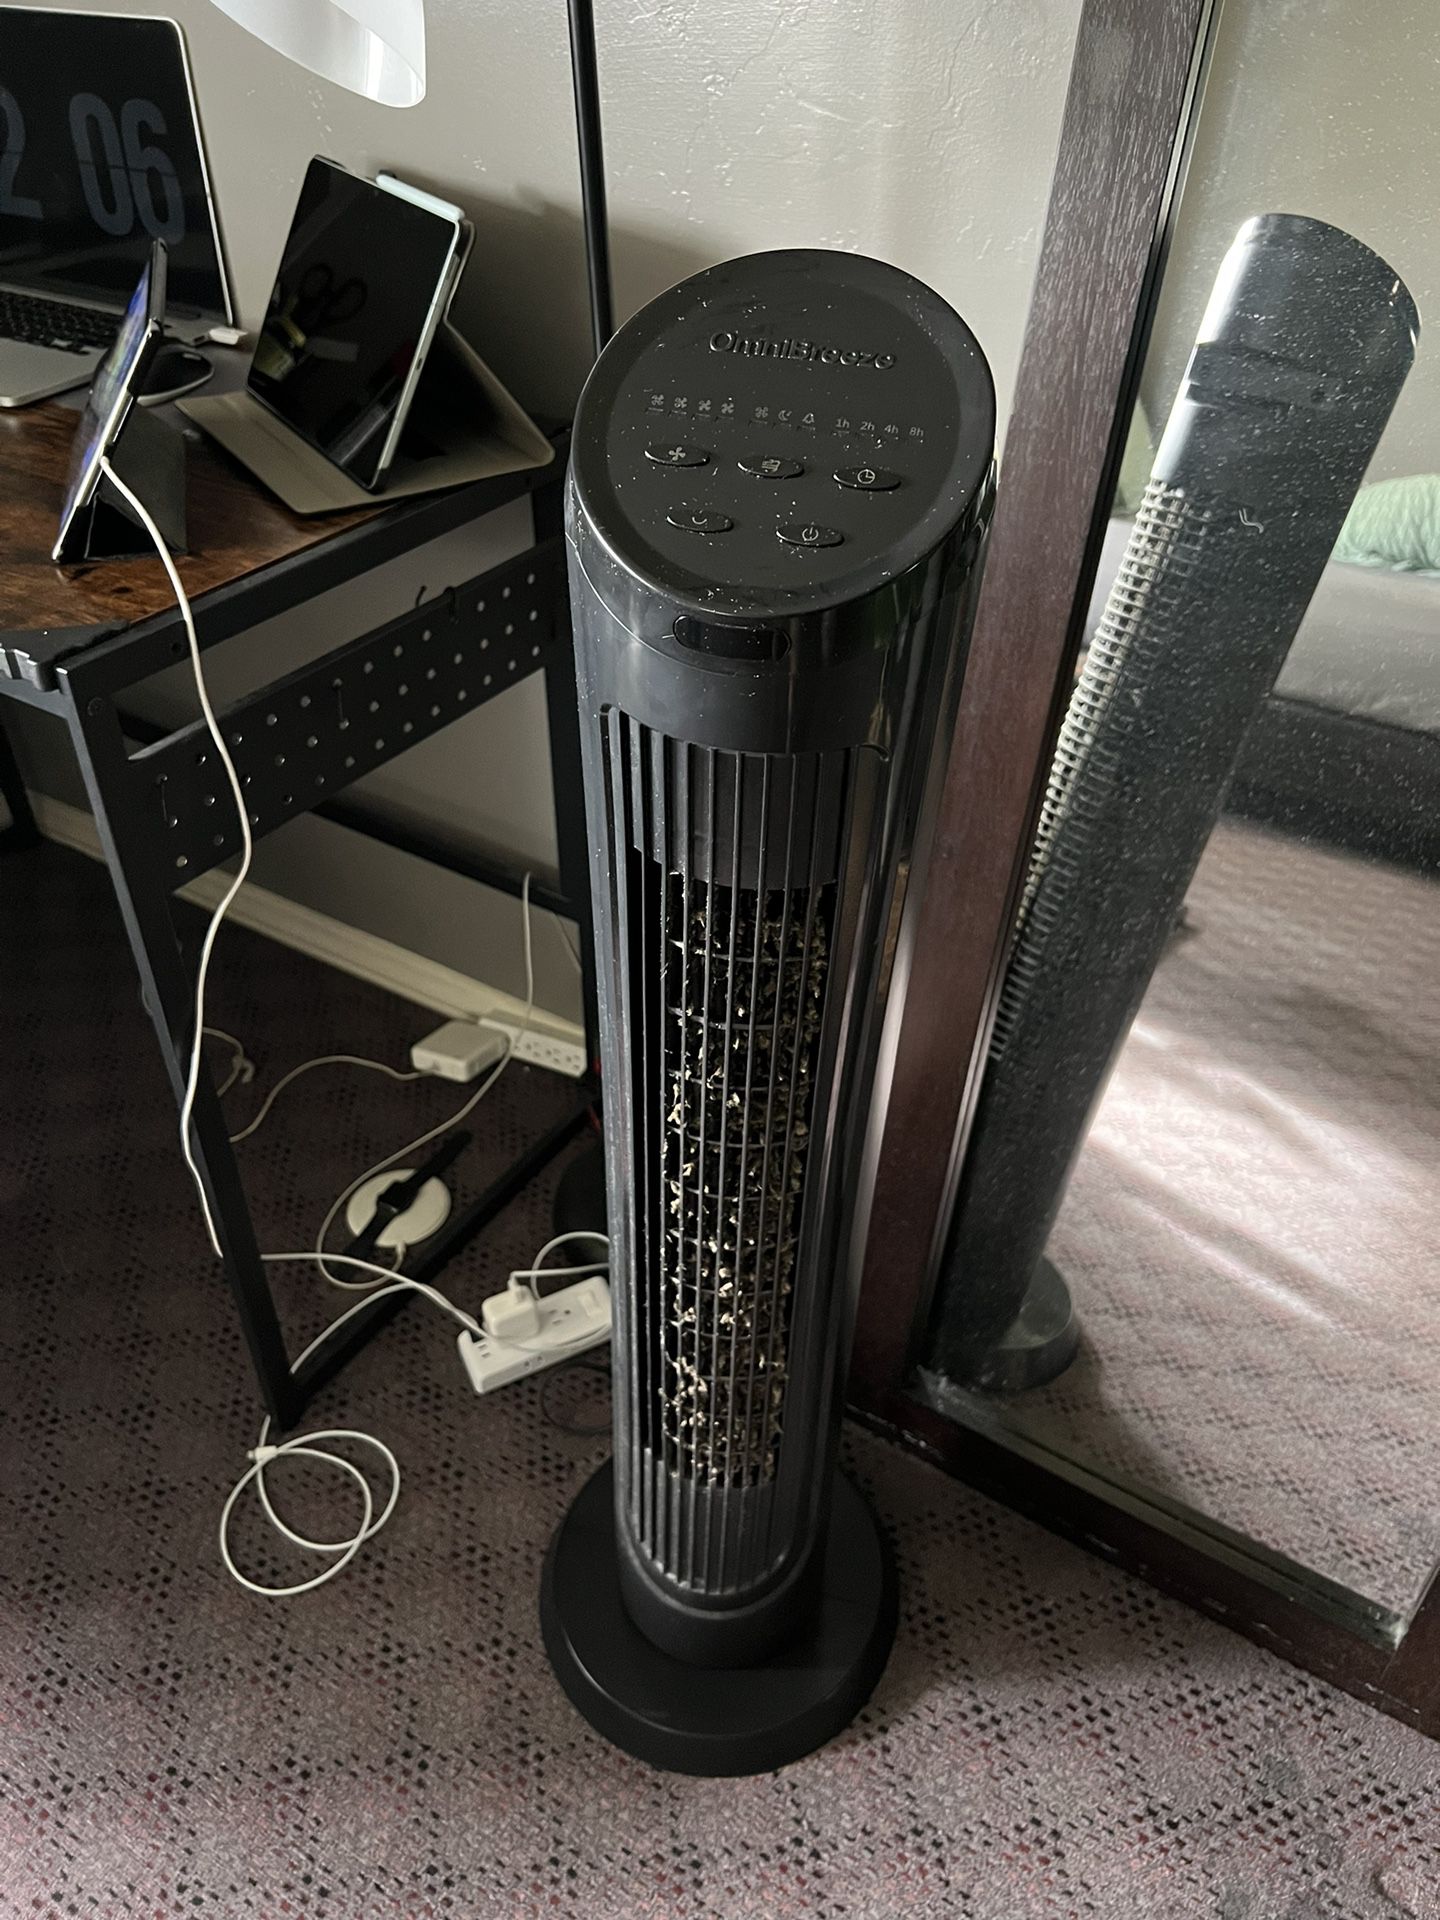 Costco OmniBreeze Tower Fan 40” With Remotee